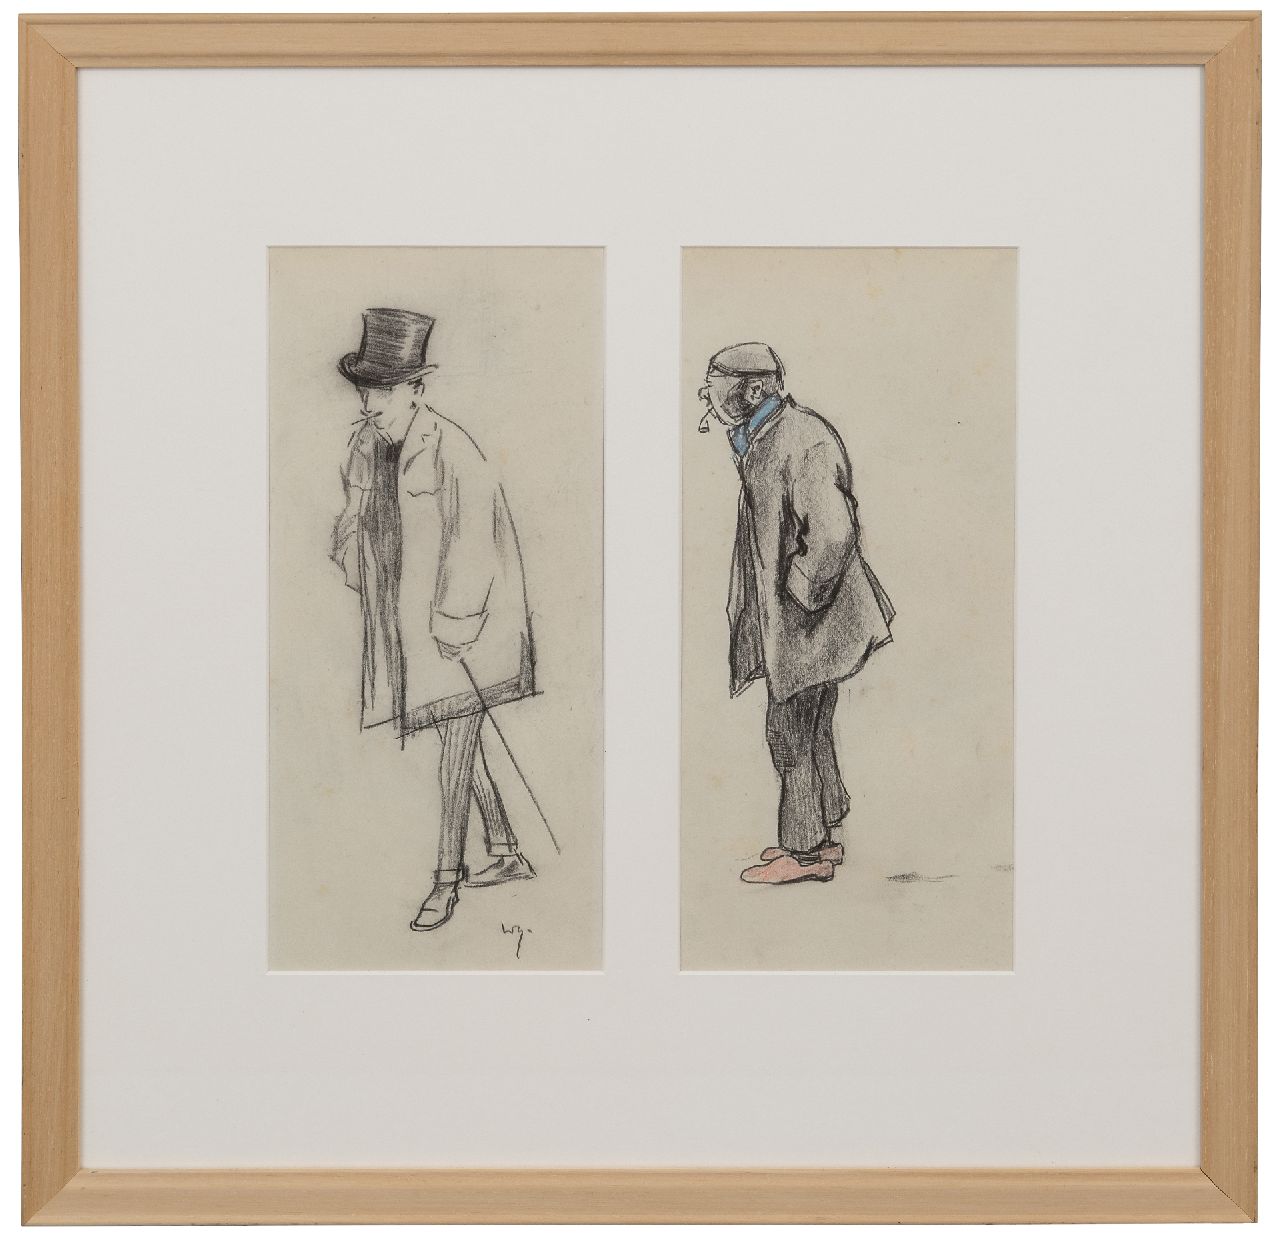 Sluiter J.W.  | Jan Willem 'Willy' Sluiter | Watercolours and drawings offered for sale | A man with a hat; a man with a pipe, pencil and coloured pencil on paper 29.5 x 30.0 cm, signed l.l.